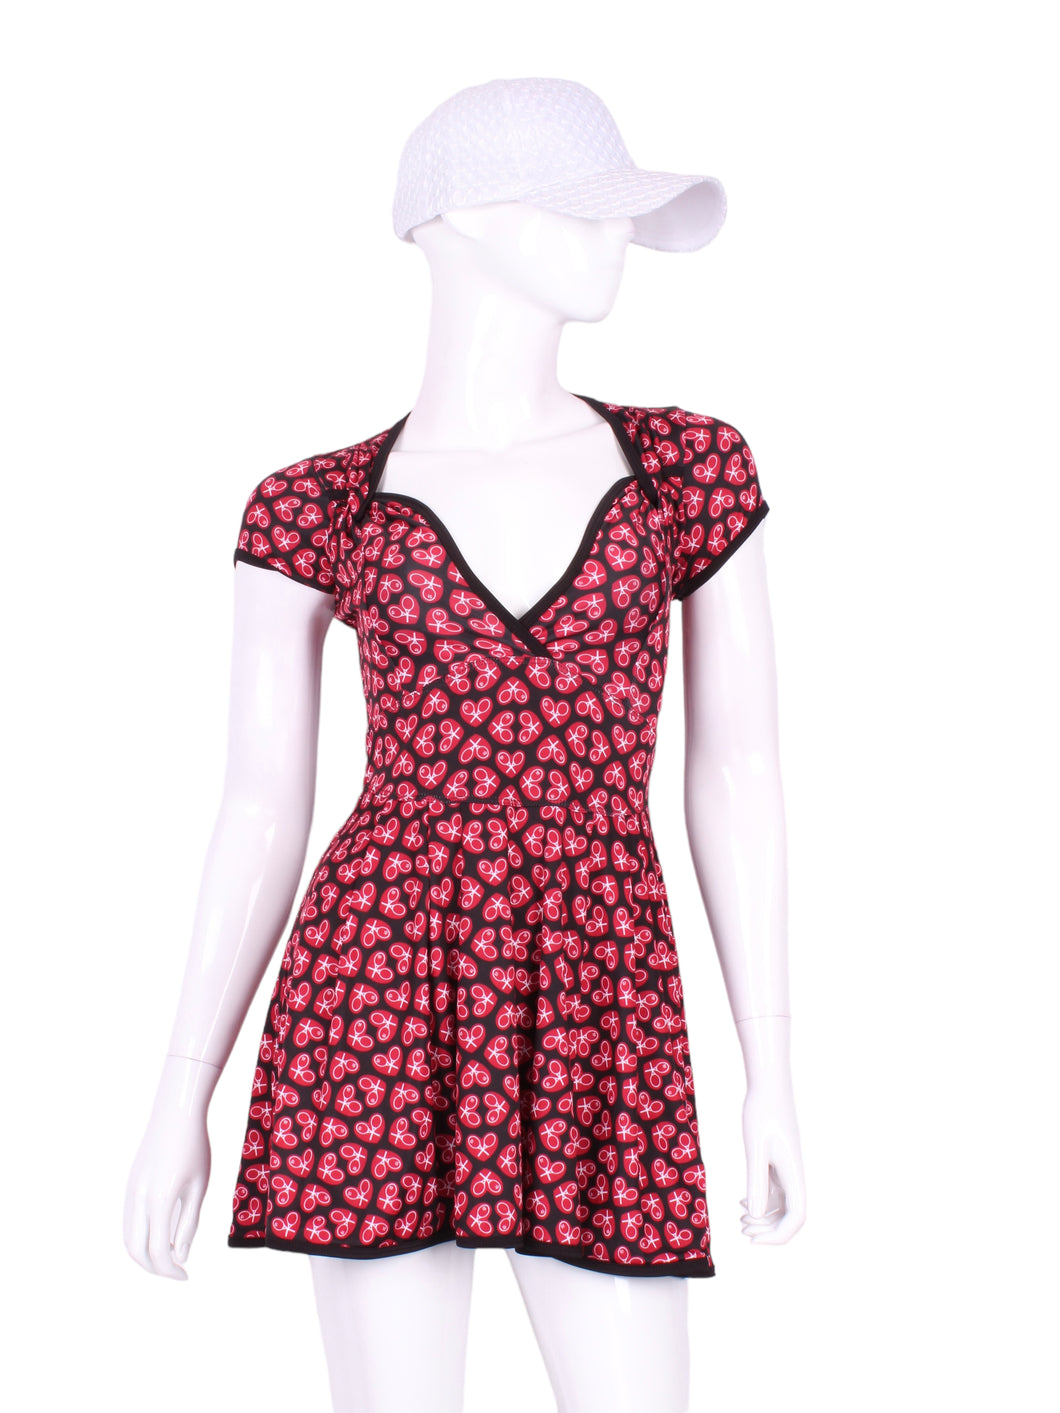 The Adeline Dress offers a playful, fun, and very flirty look. Offers a sweetheart neckline, empire waist and flowing A-line skirt. It is perfect for tennis, running and golf (with our Leg Lengthening Leggings), and of course, a trip to your after-court party with your friends. It was designed for confident women like you!